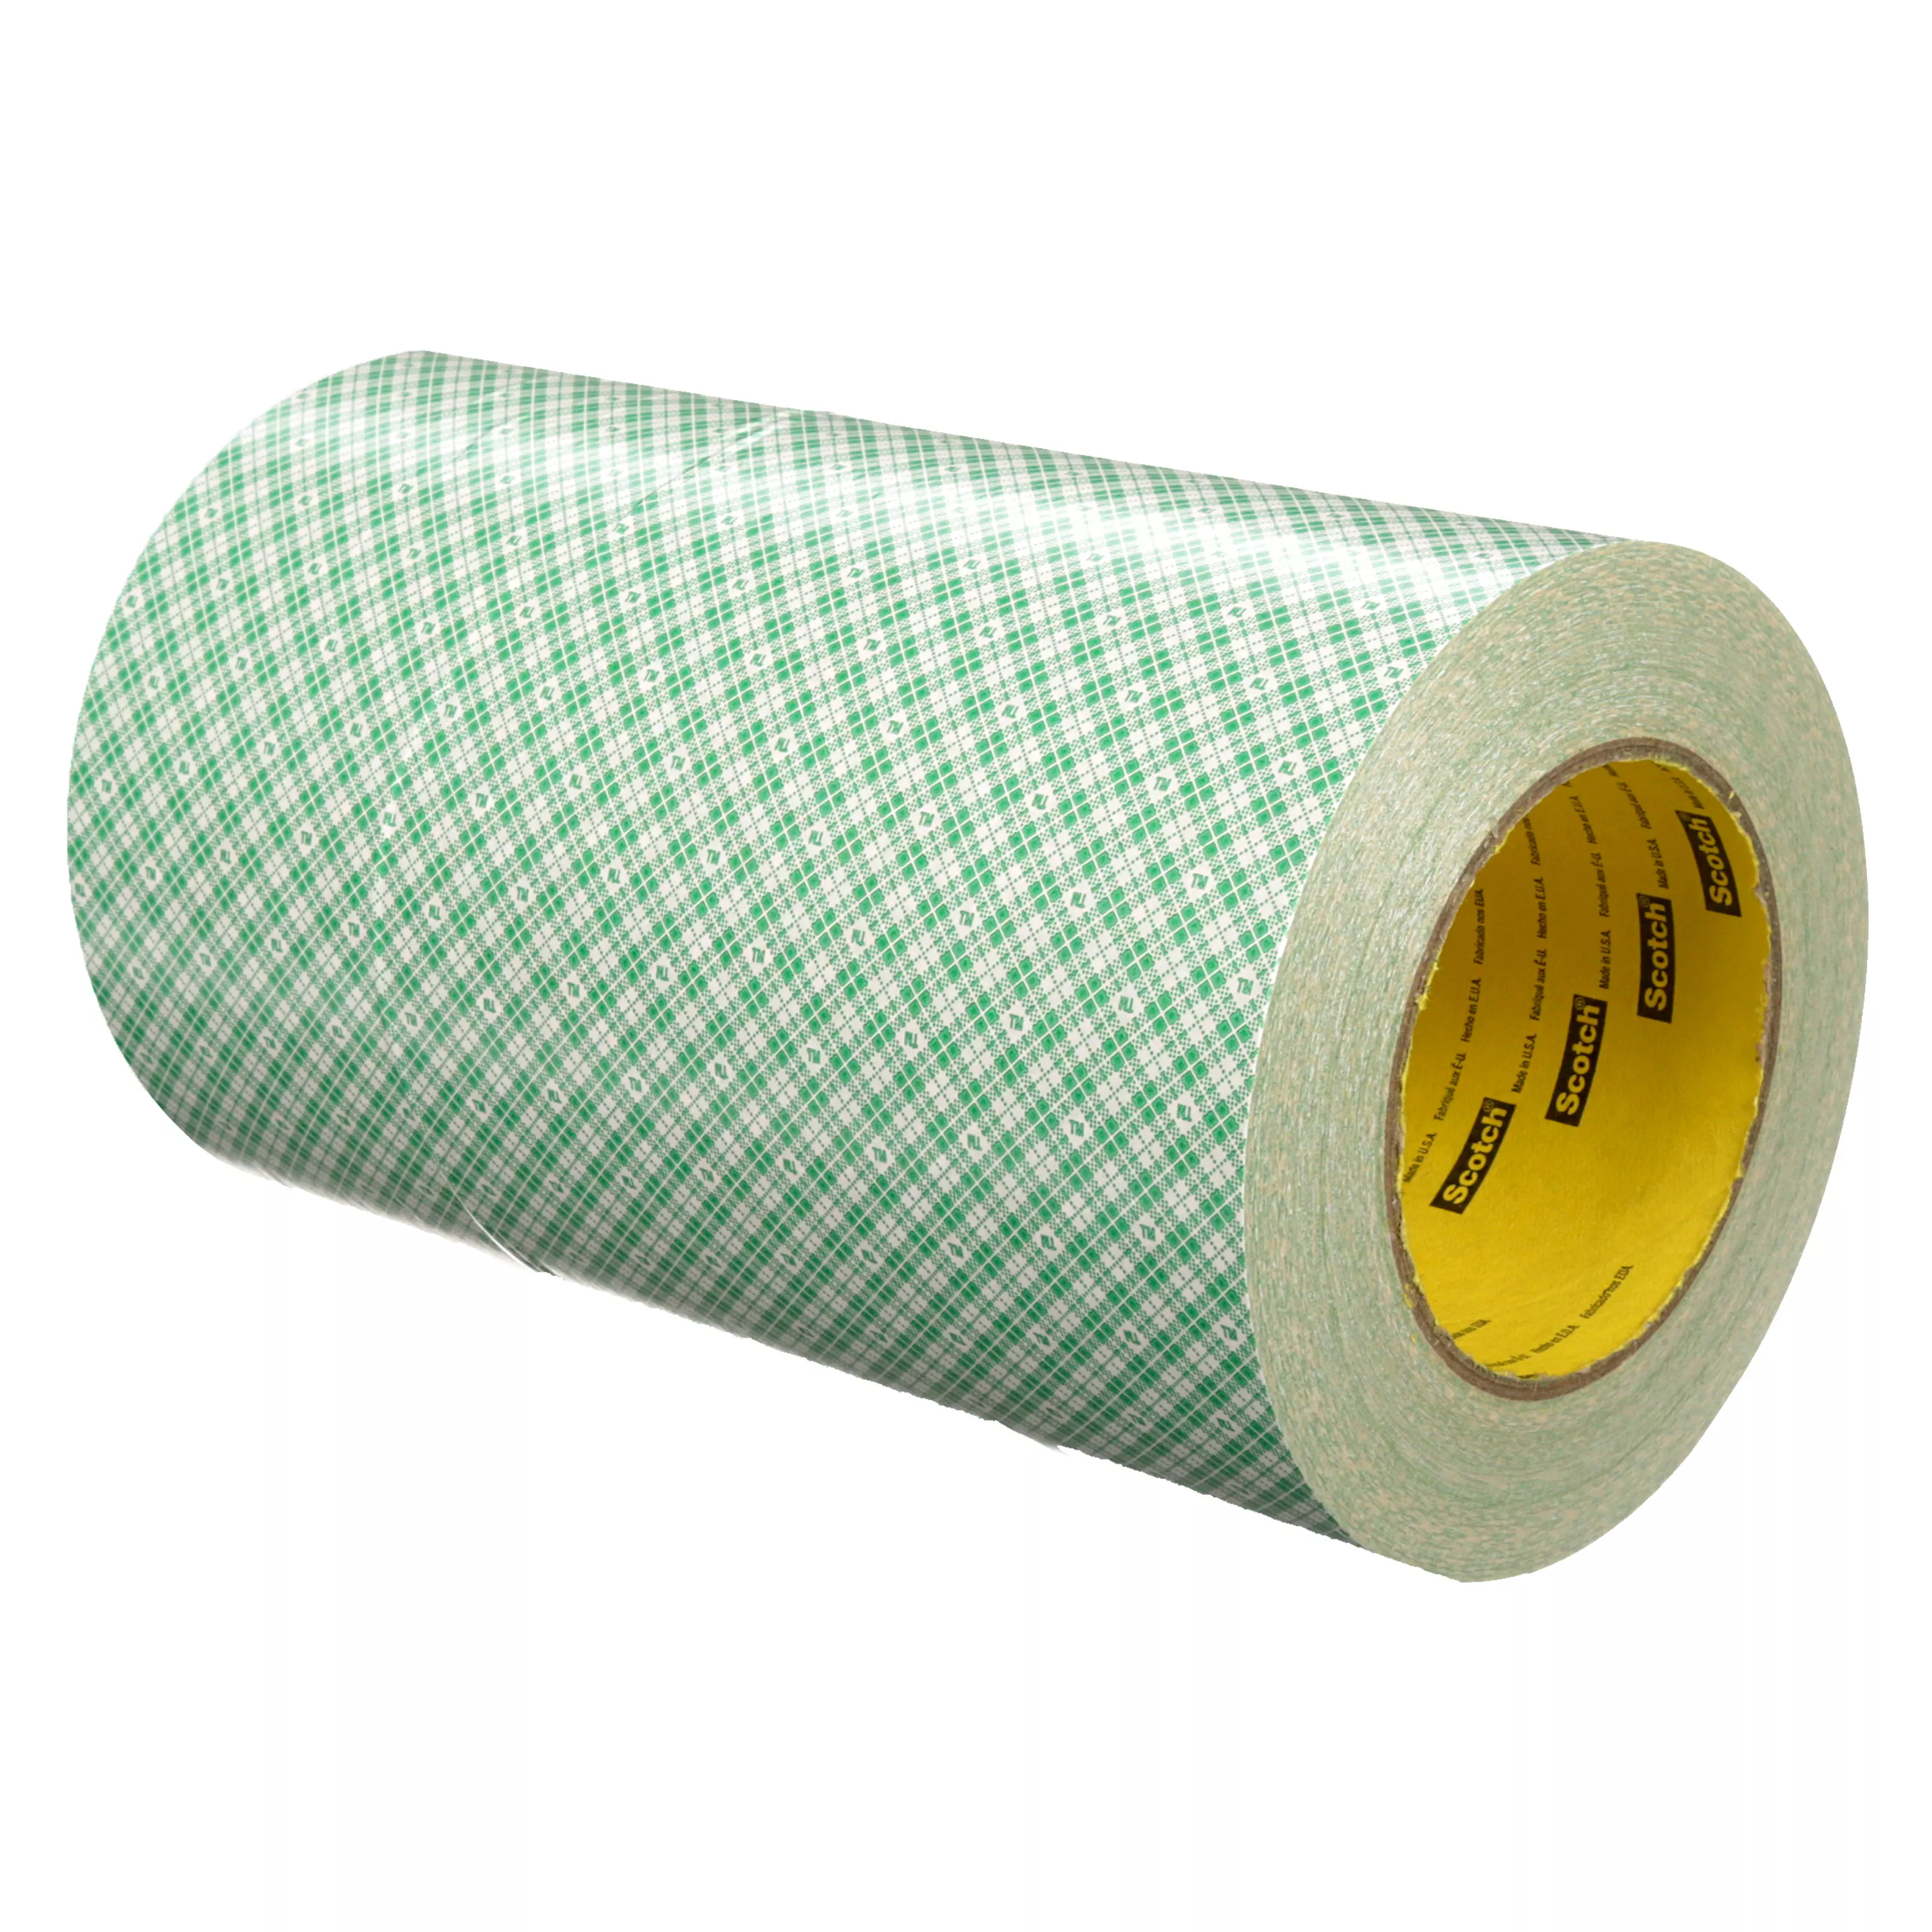 3M™ Double Coated Paper Tape 410M, Natural, 8 in x 36 yd, 5 mil, 4
Roll/Case